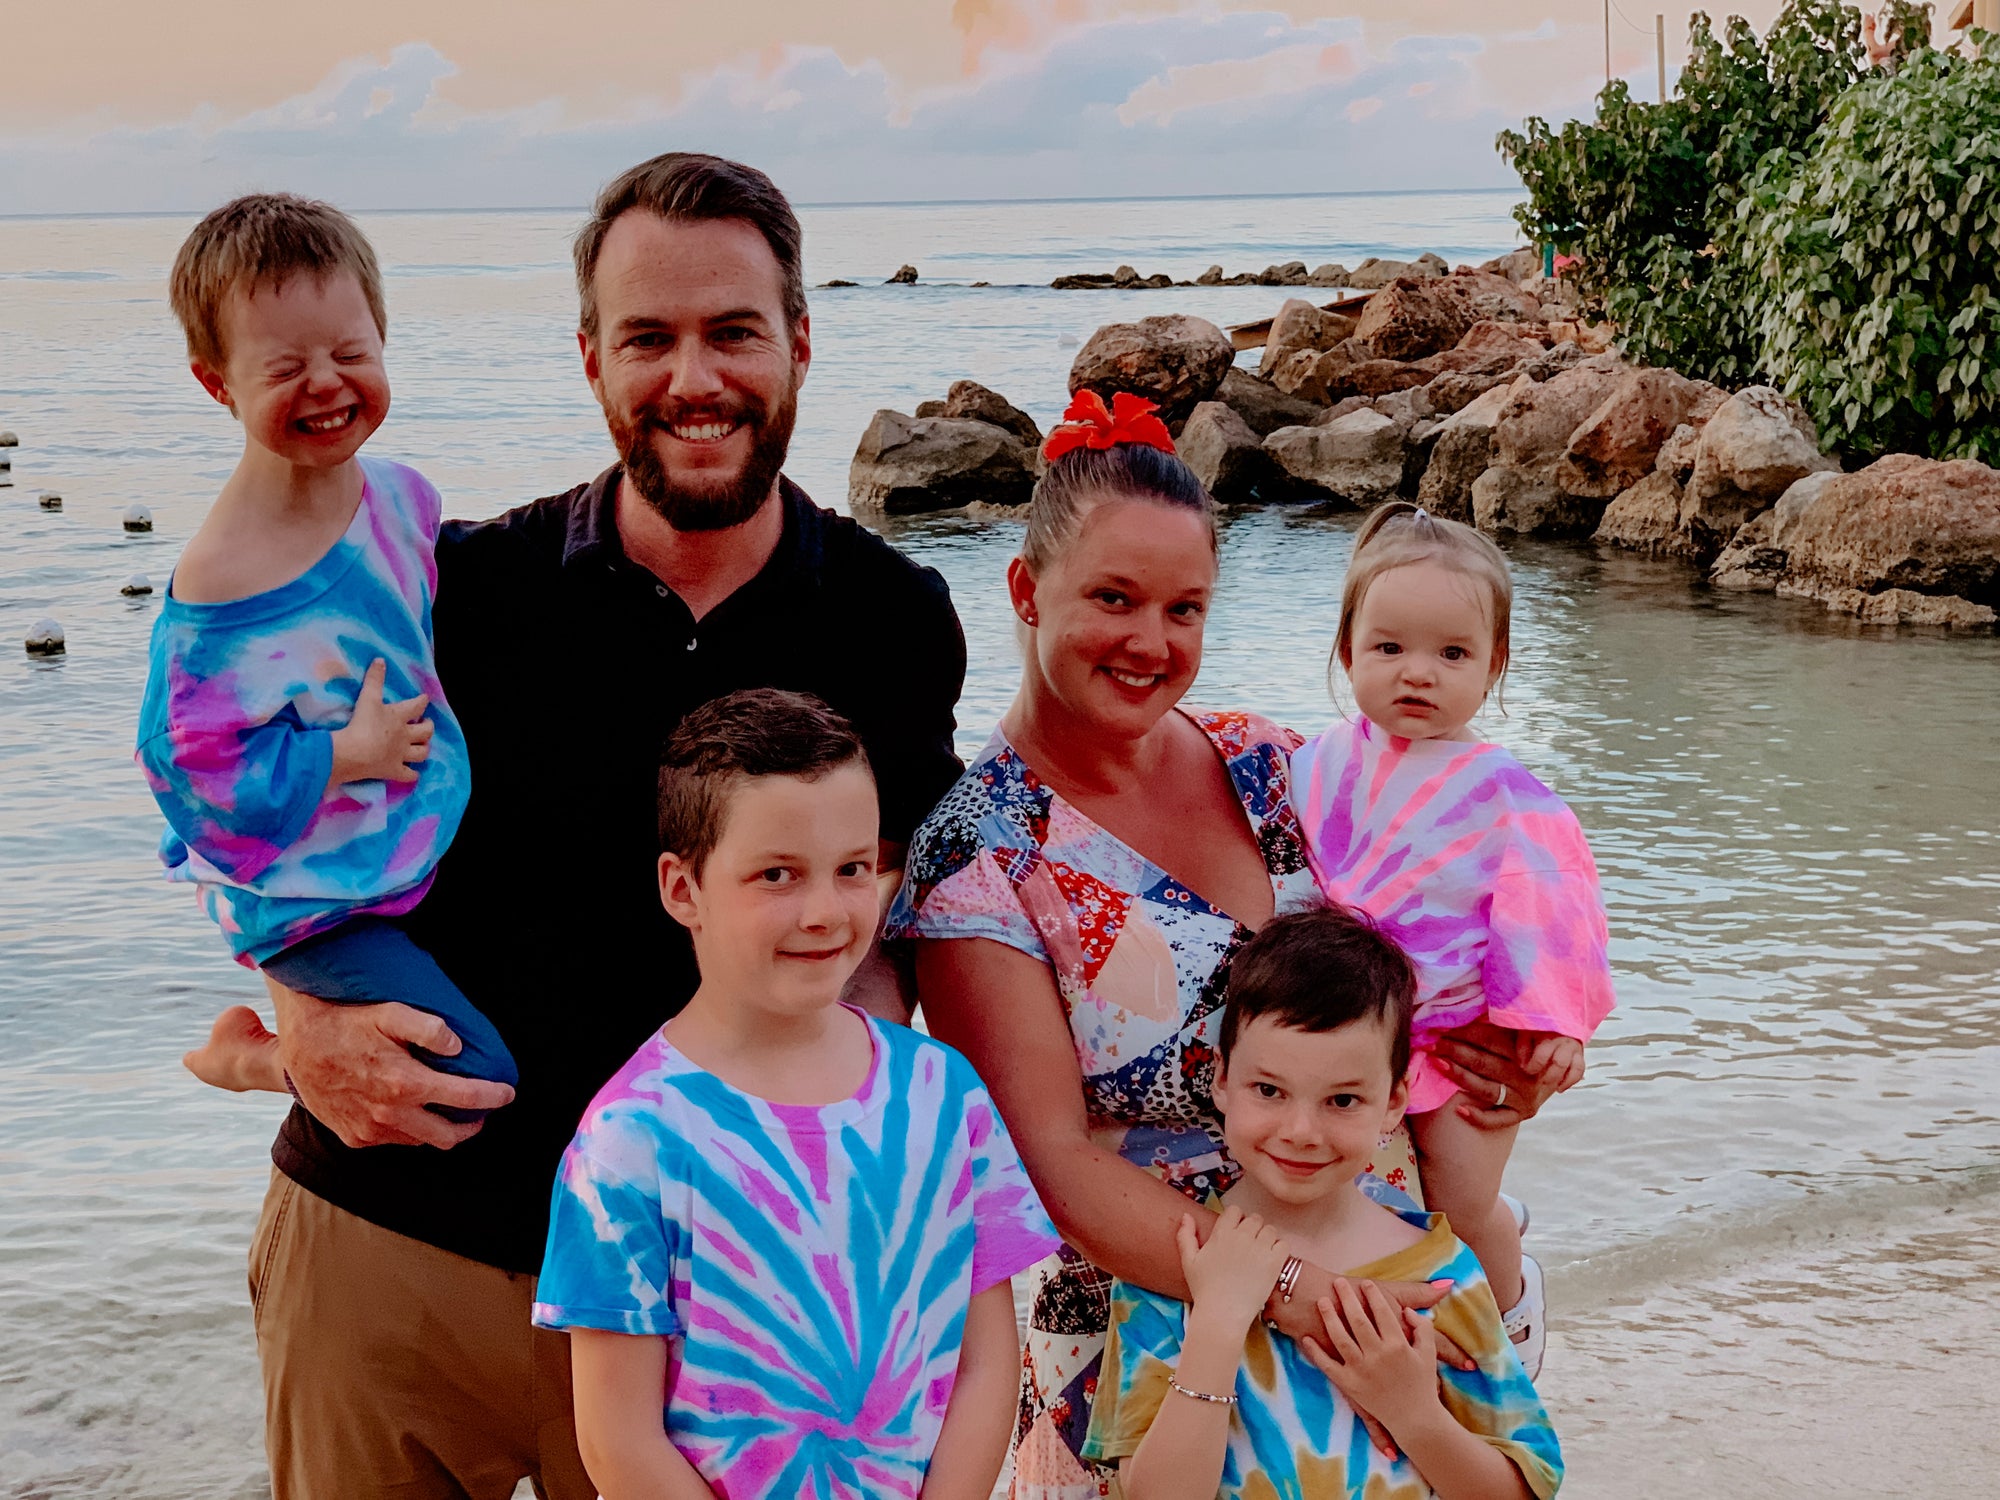 Instablog @travels4kids - The McLean Family Travels... to Jamaica!